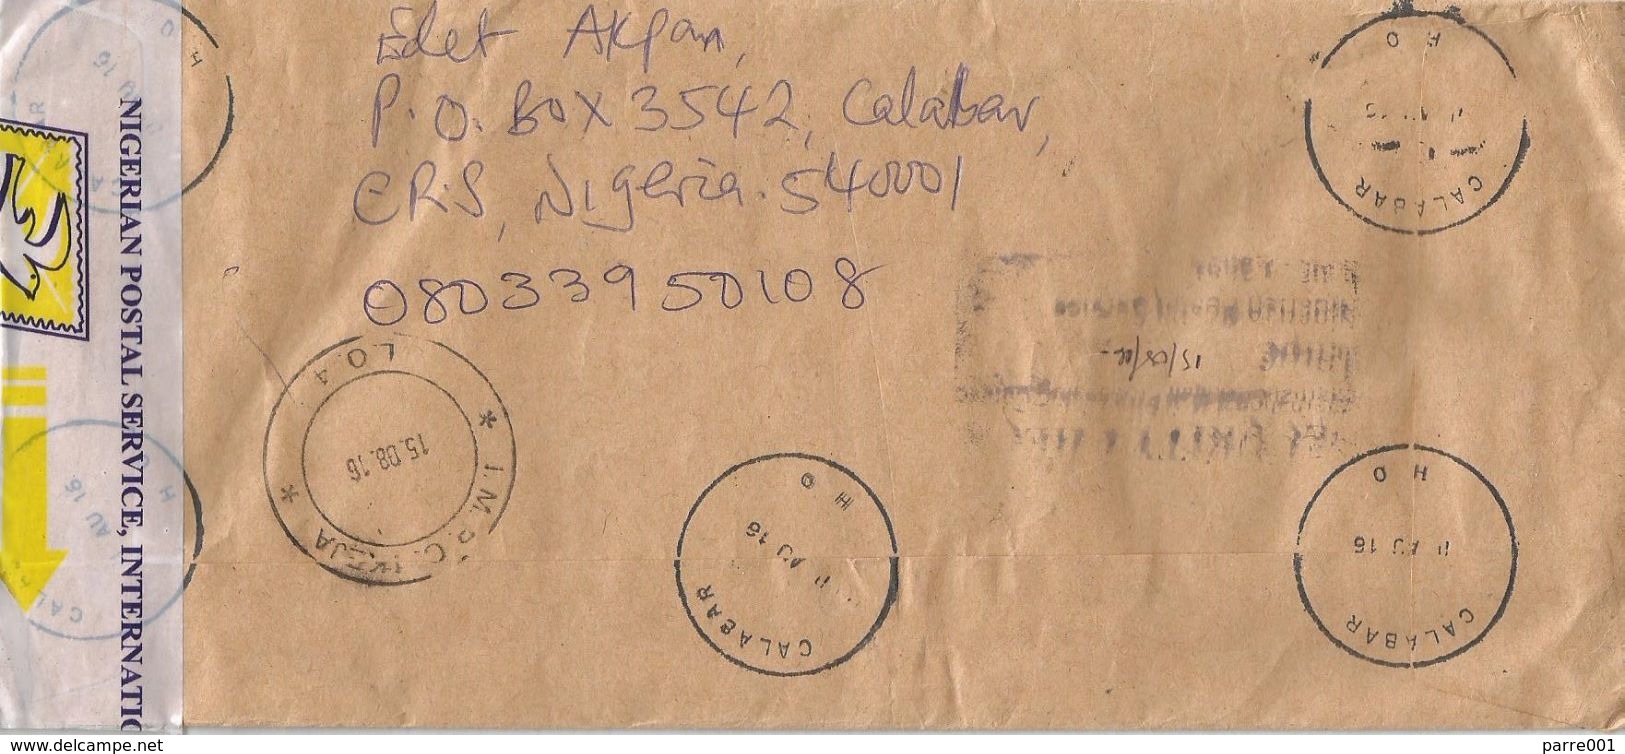 Nigeria 2016 Calabar Slave Chains Bank Barcoded Registered Cover Checked And Resealed At Lagos - Nigeria (1961-...)